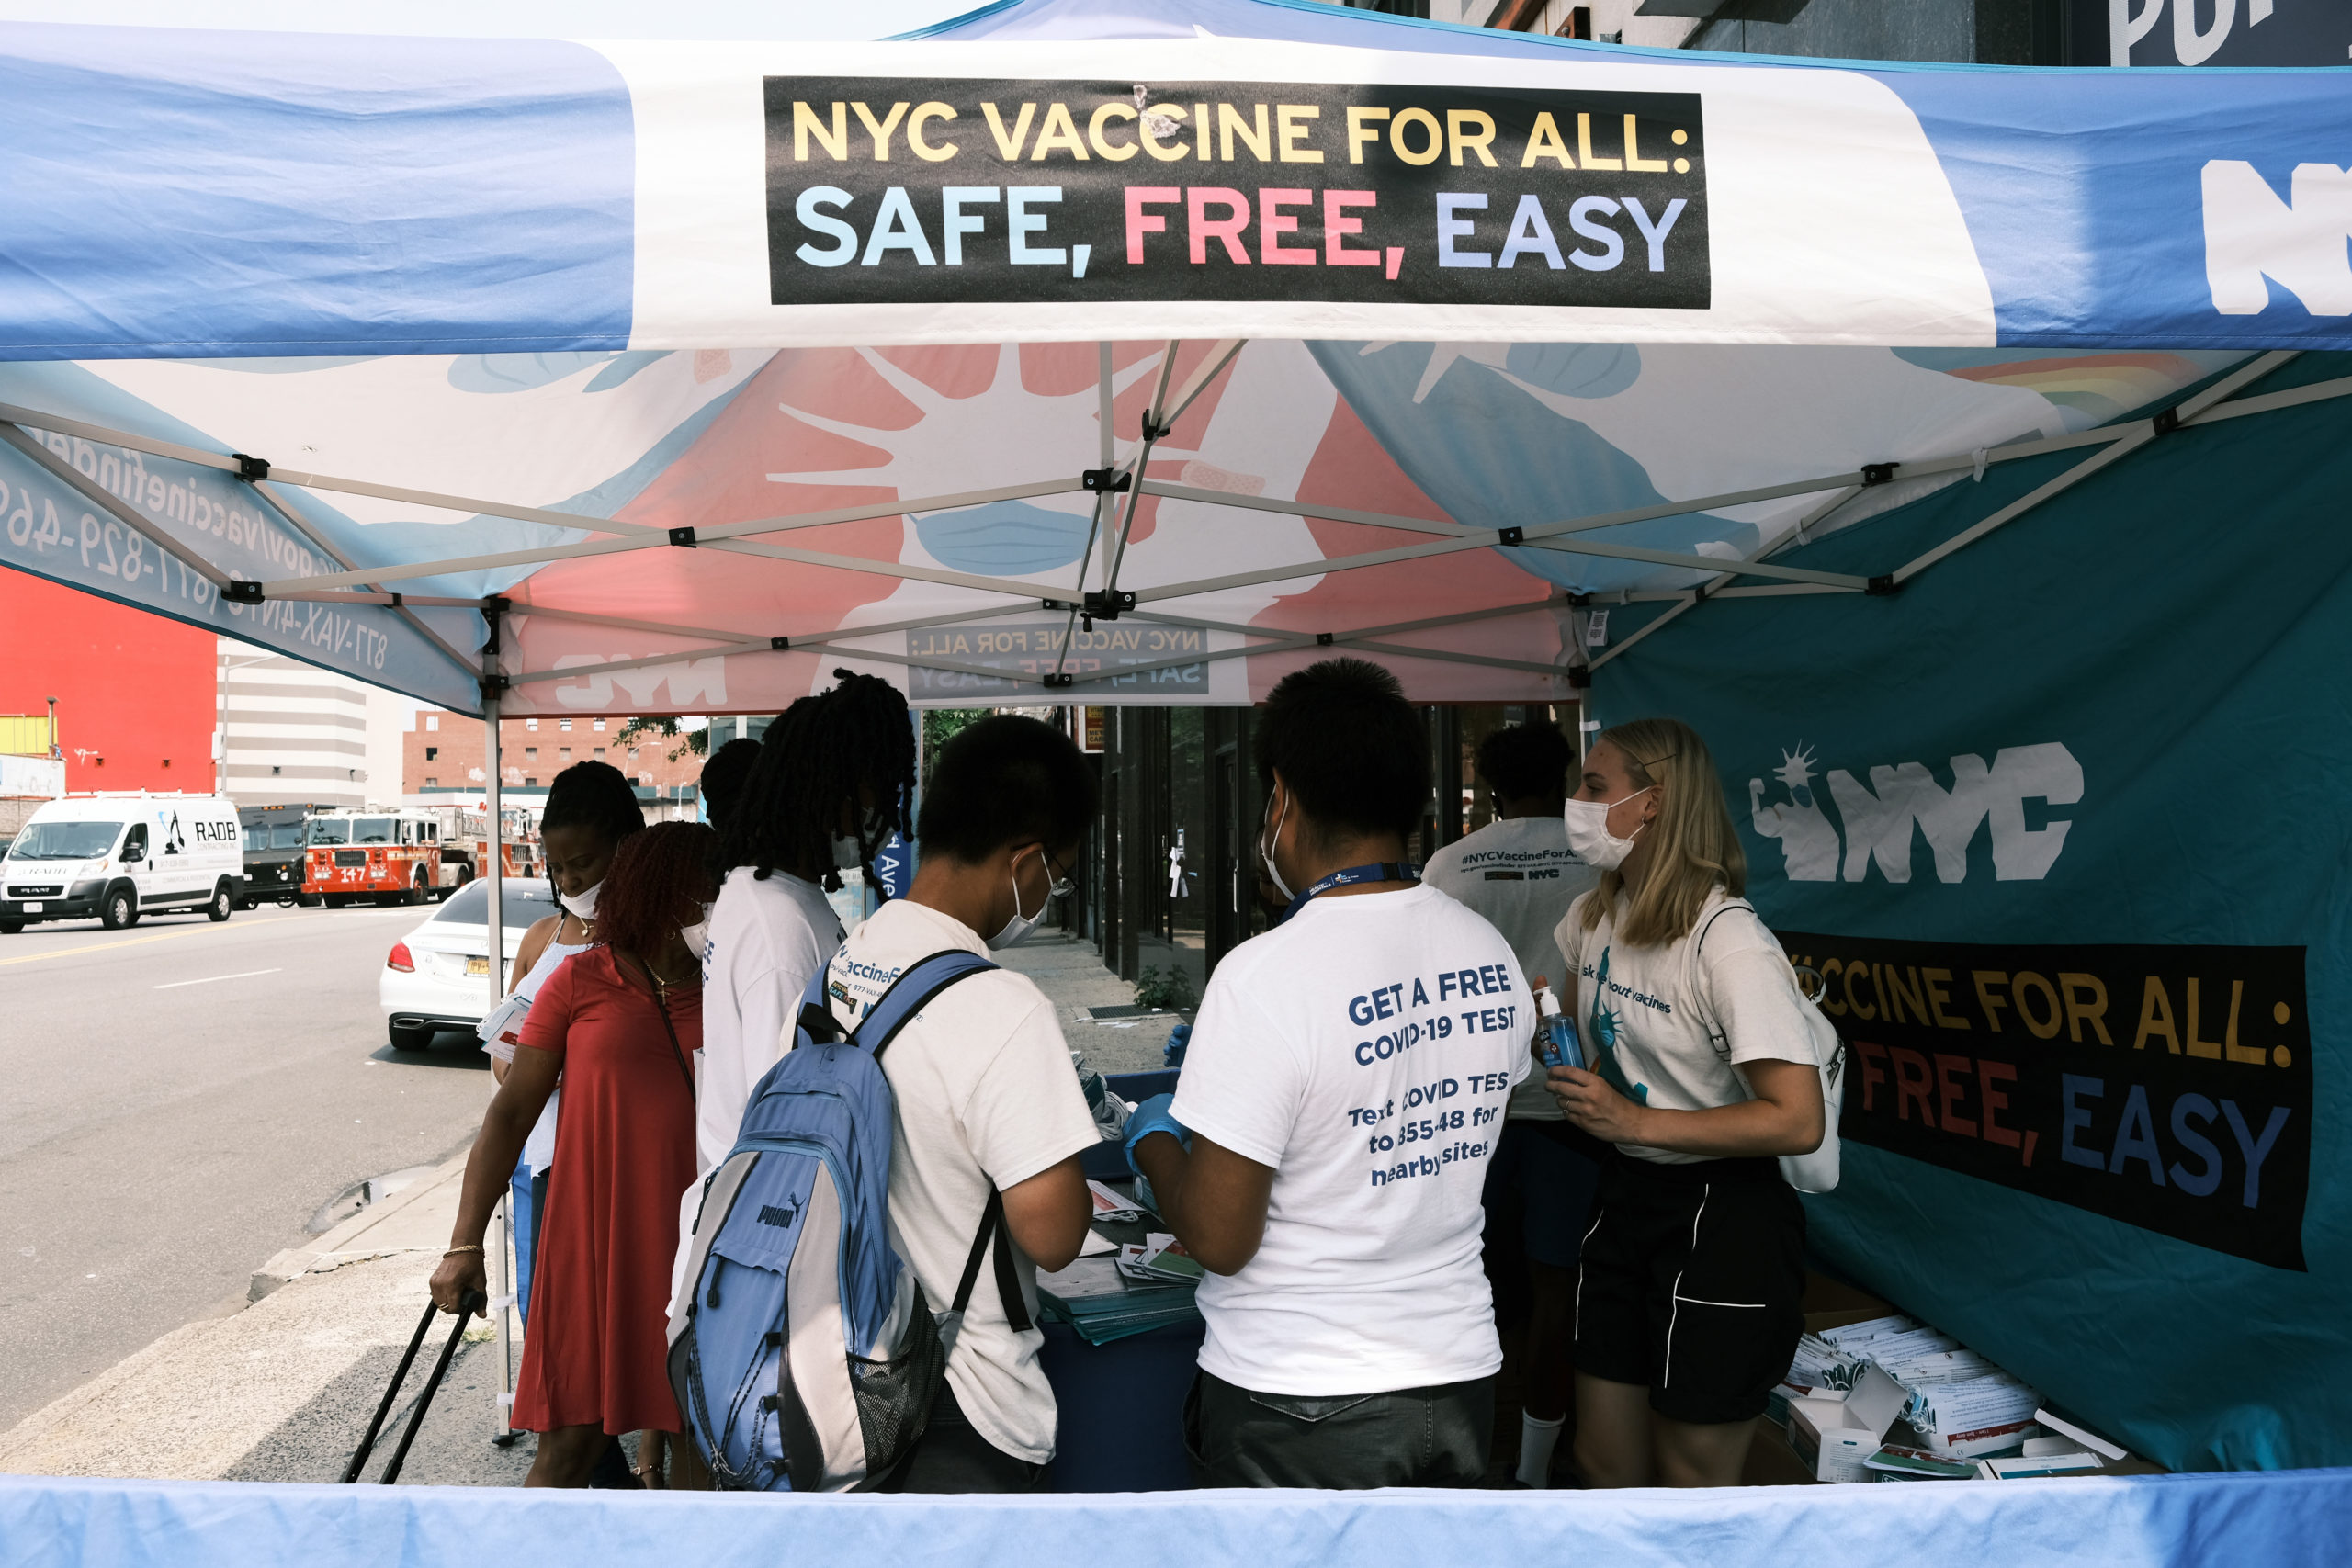 A mobile vaccination clinic pictured in New York City on July 26. (Spencer Platt/Getty Images)